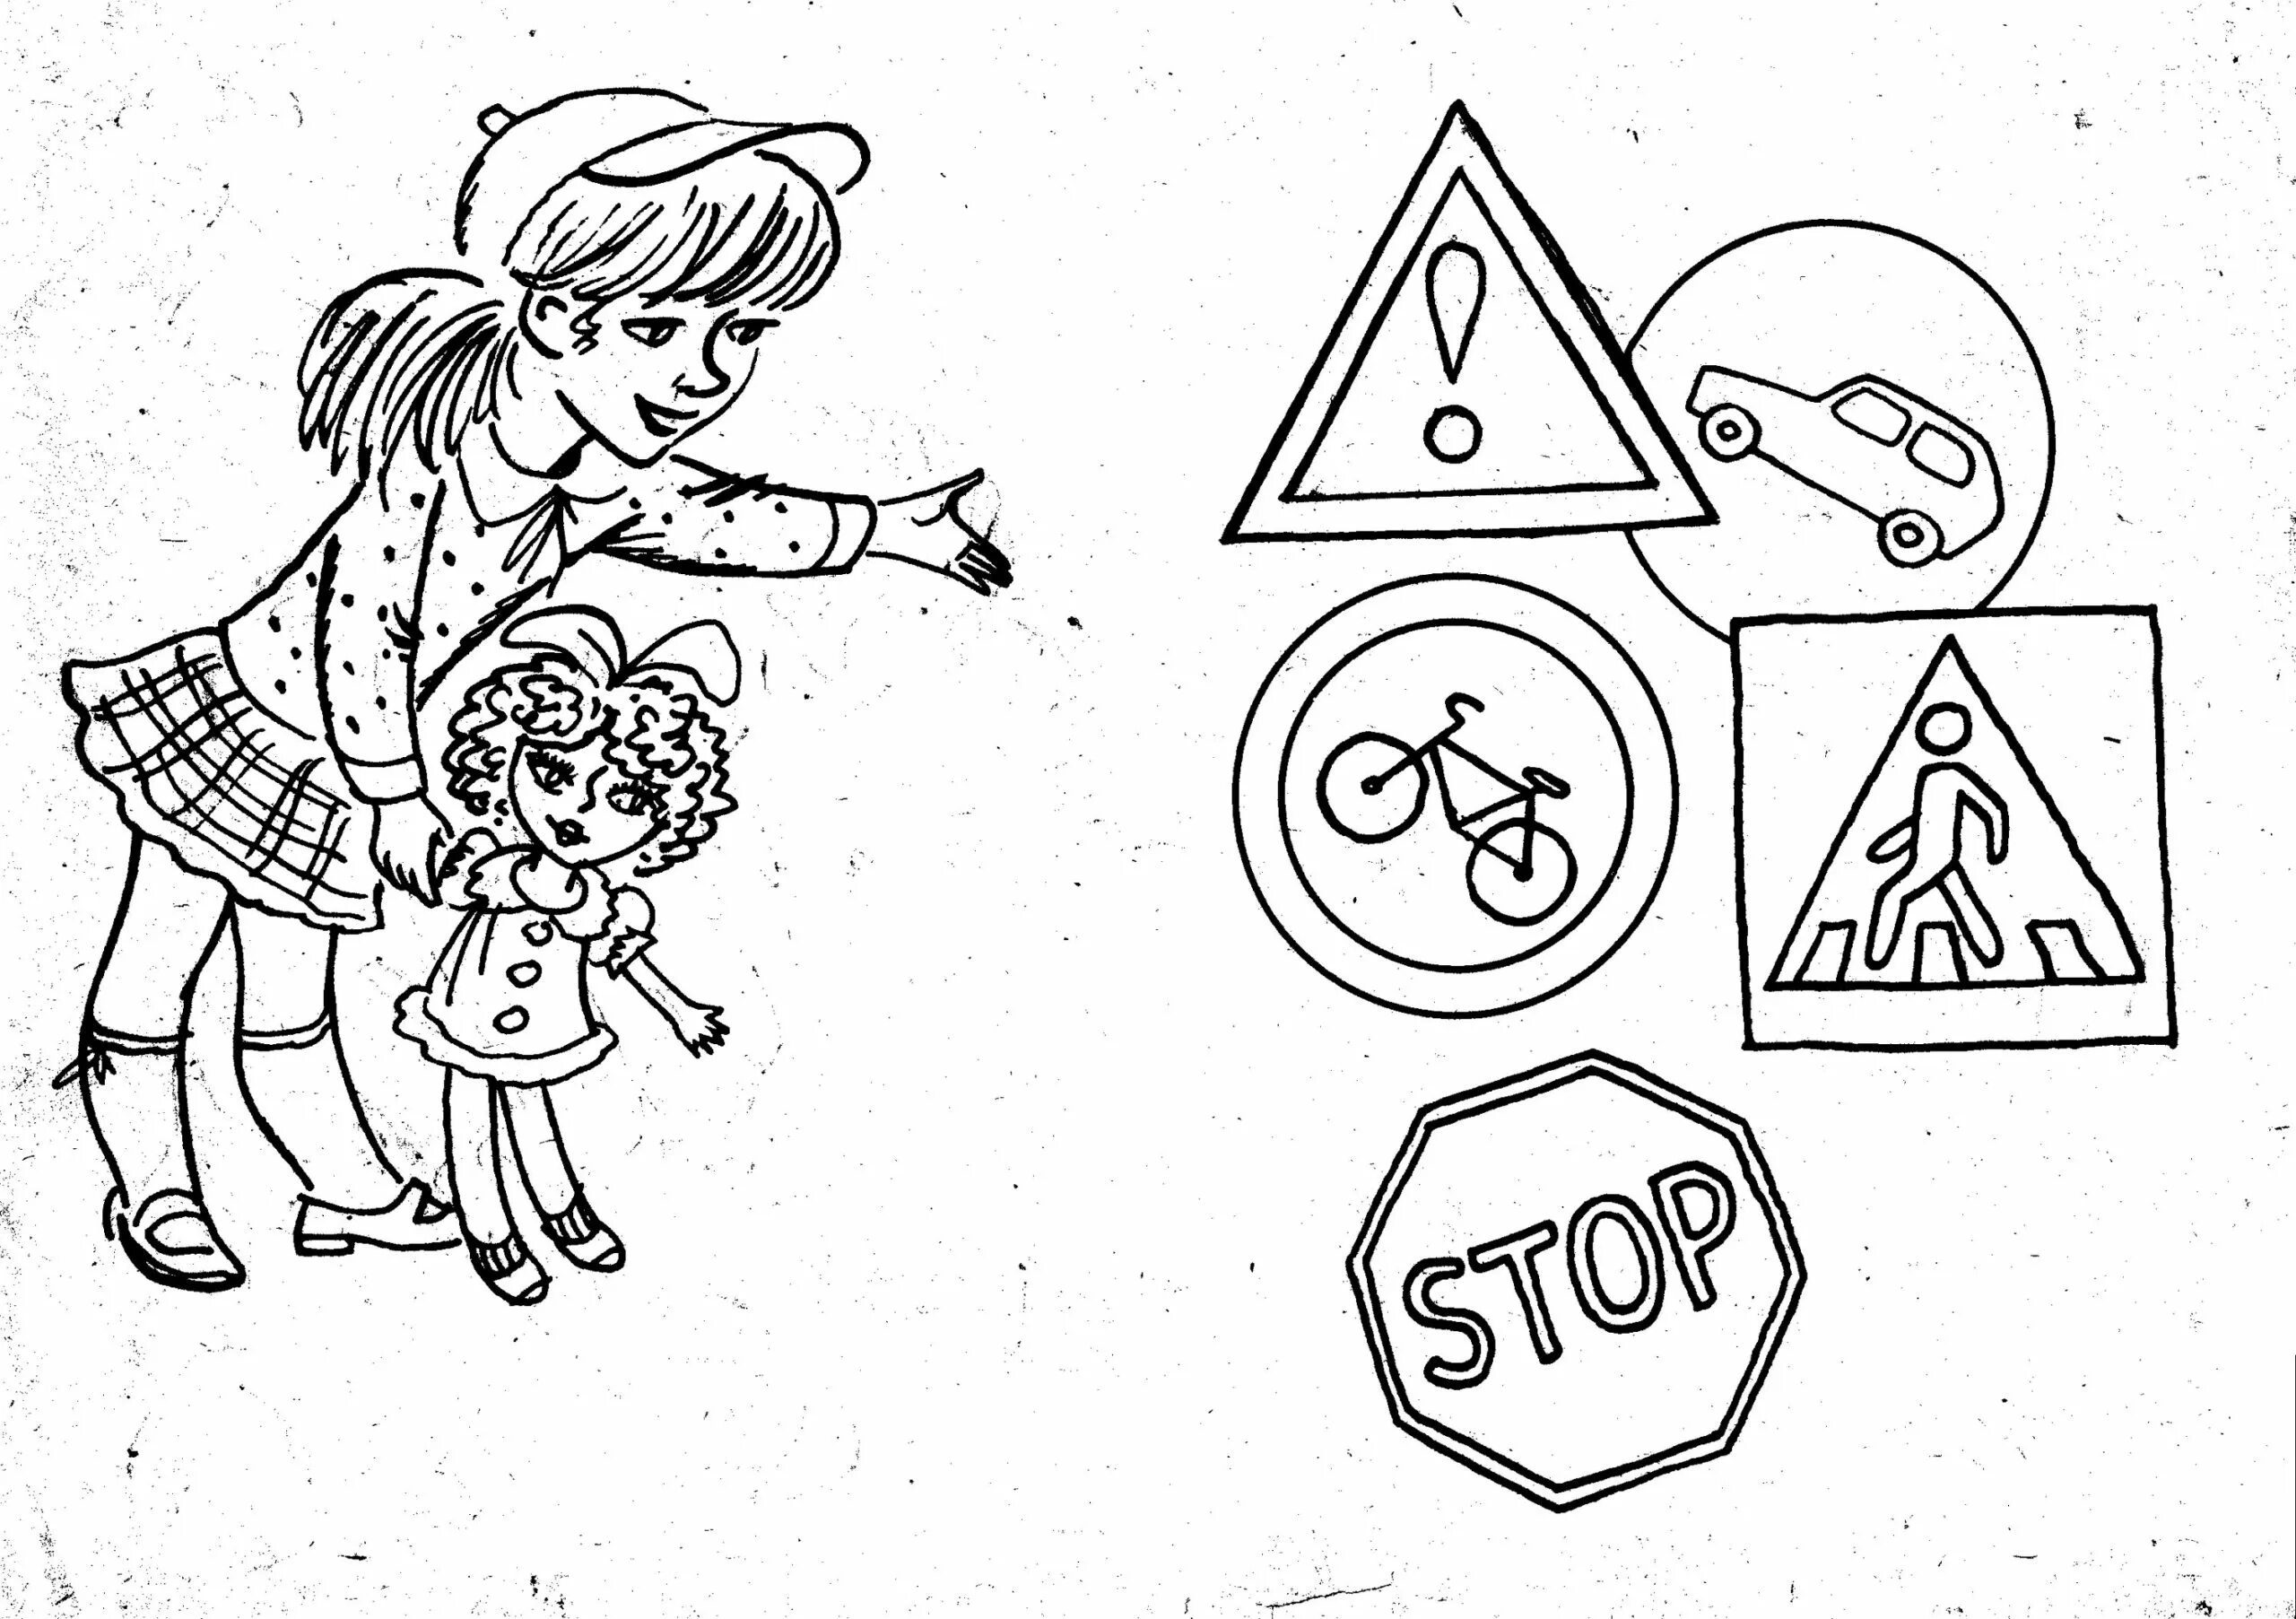 According to traffic rules for preschoolers preparatory group #26